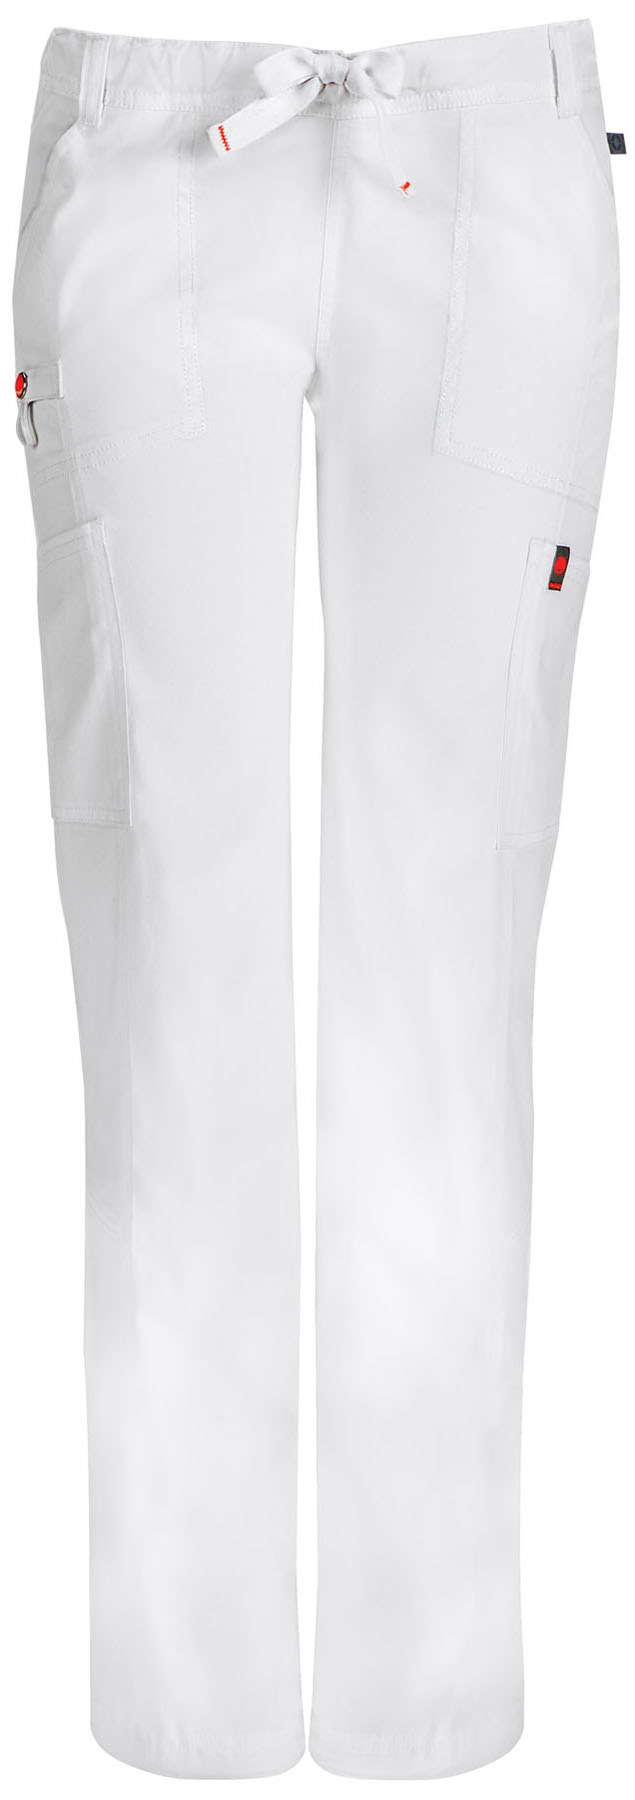 Code Happy Medical Bliss w/ Certainty 46000A Low Rise Straight Leg Drawstring Pant-Code Happy